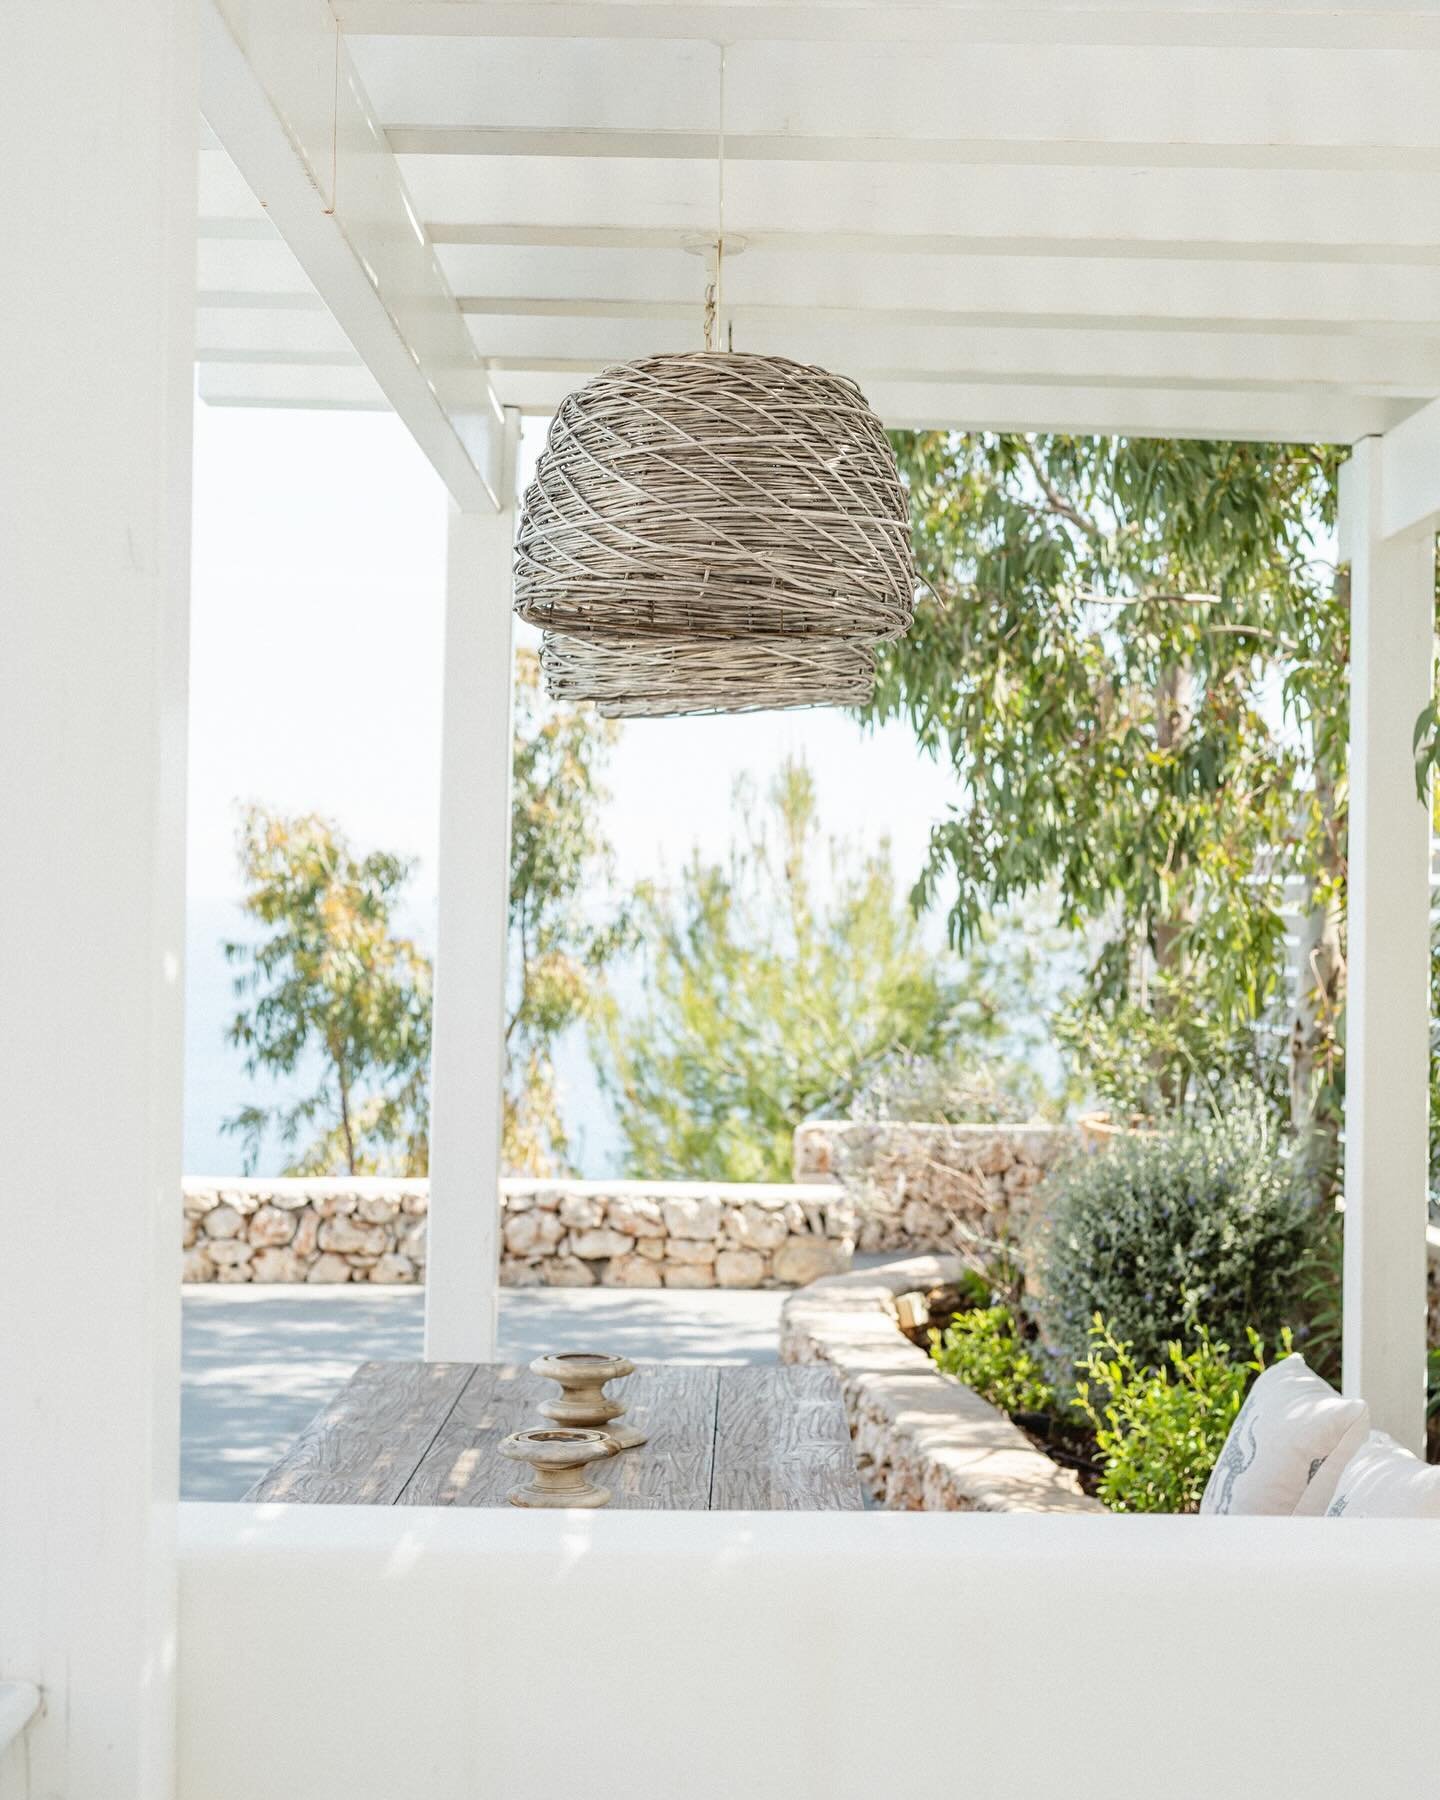 Breakfast, lunch and dinner with a view🌊🤍

Scroll to the end to spot Kefalonia island!

📍Villa Antilia 
⠀⠀⠀⠀⠀⠀⠀⠀⠀
&bull;
&bull;
&bull;
&bull;
#travellingtips #designvilla #bohemianstyle #designhouse #luxuryhouse #luxurytraveller #architecturedesig